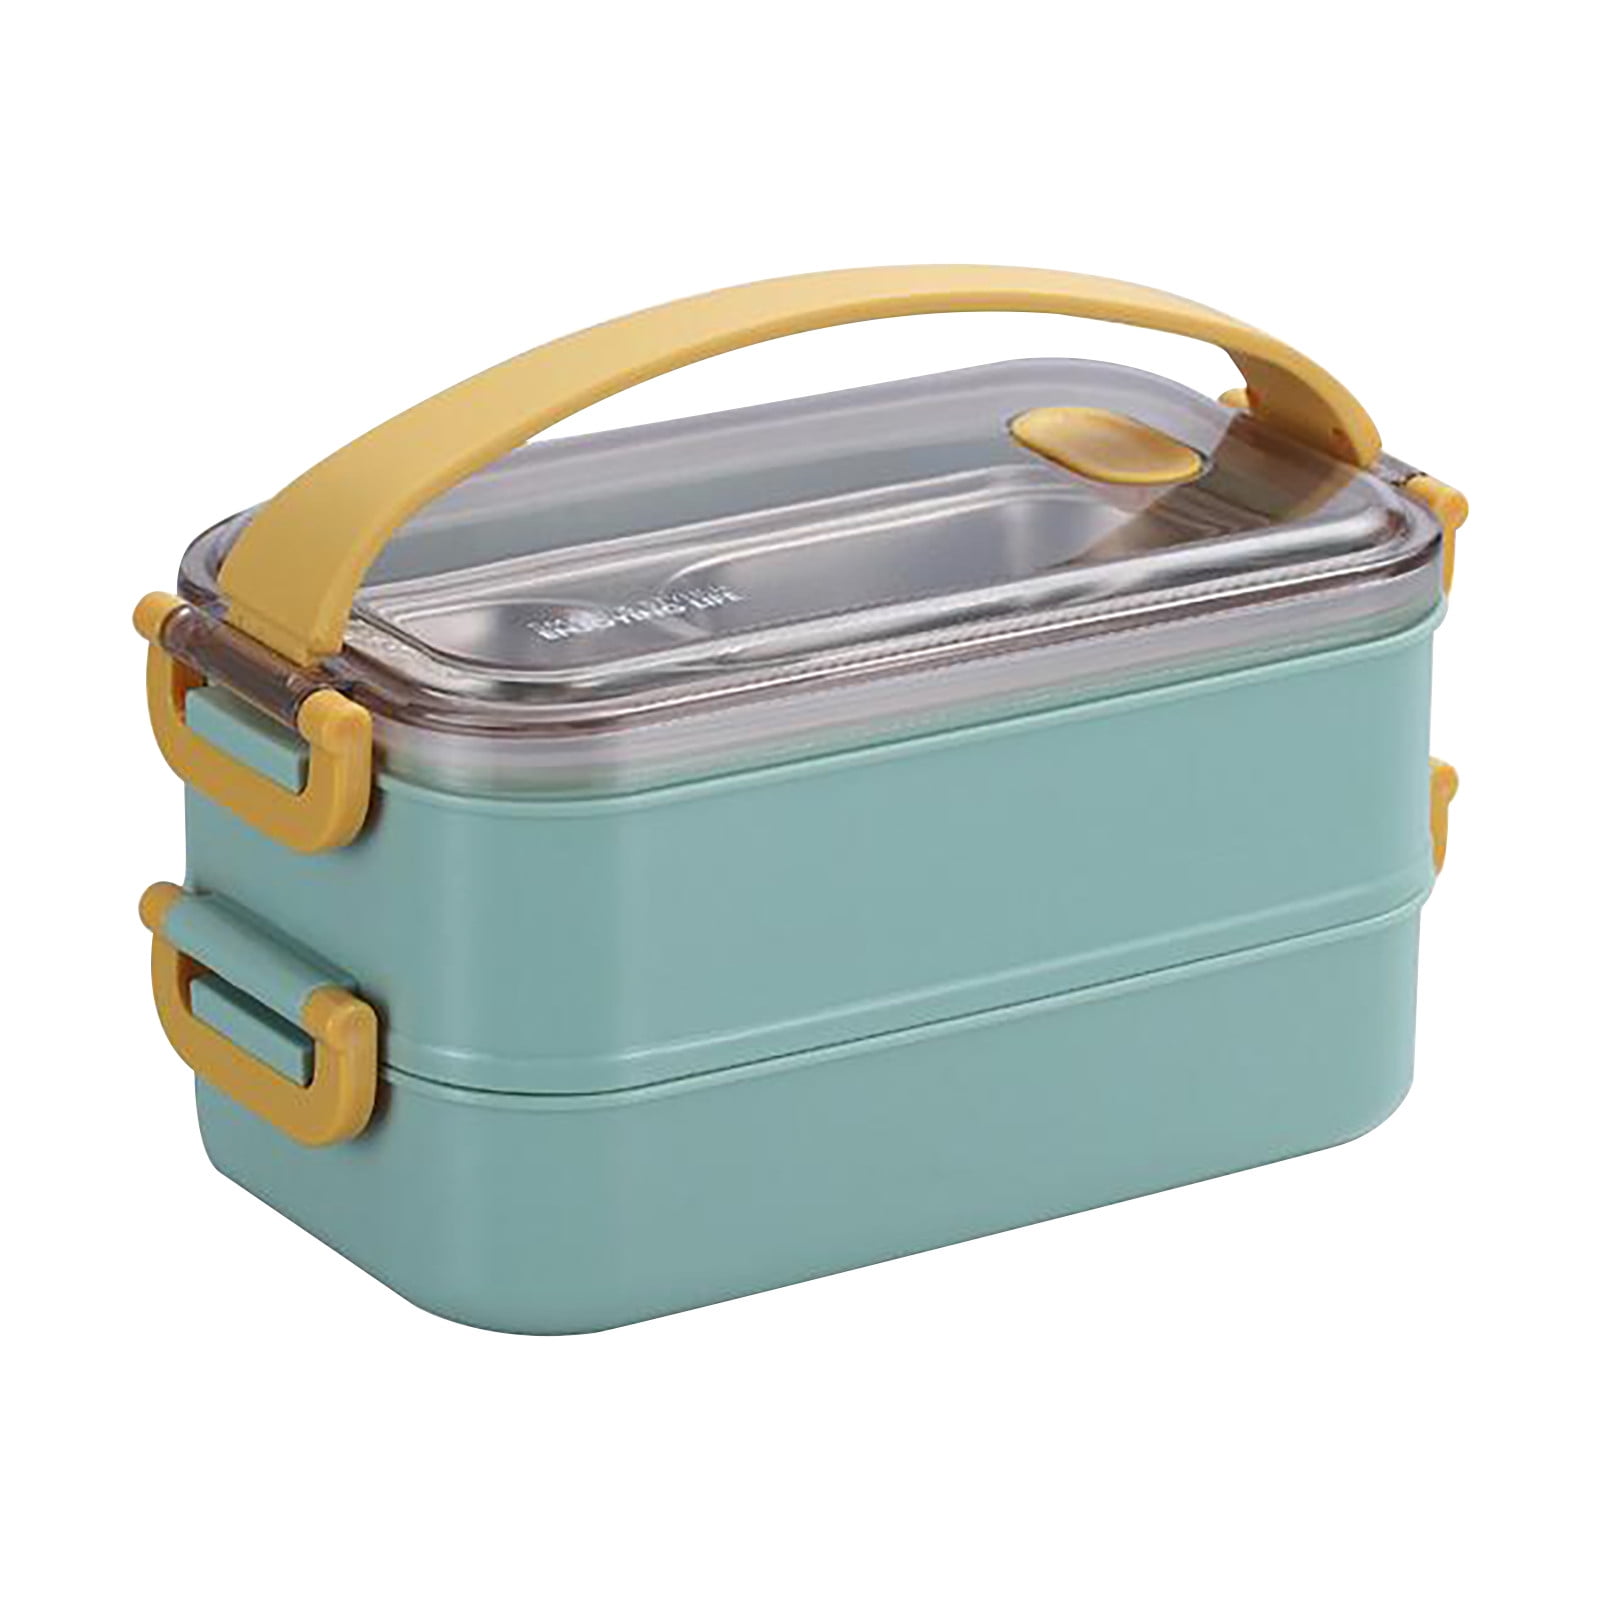 Willstar 30oz Portable Food Warmer School Lunch Box Bento Thermal Insulated Food Container Stainless Steel Insulated Square Lunch Box for Healthy